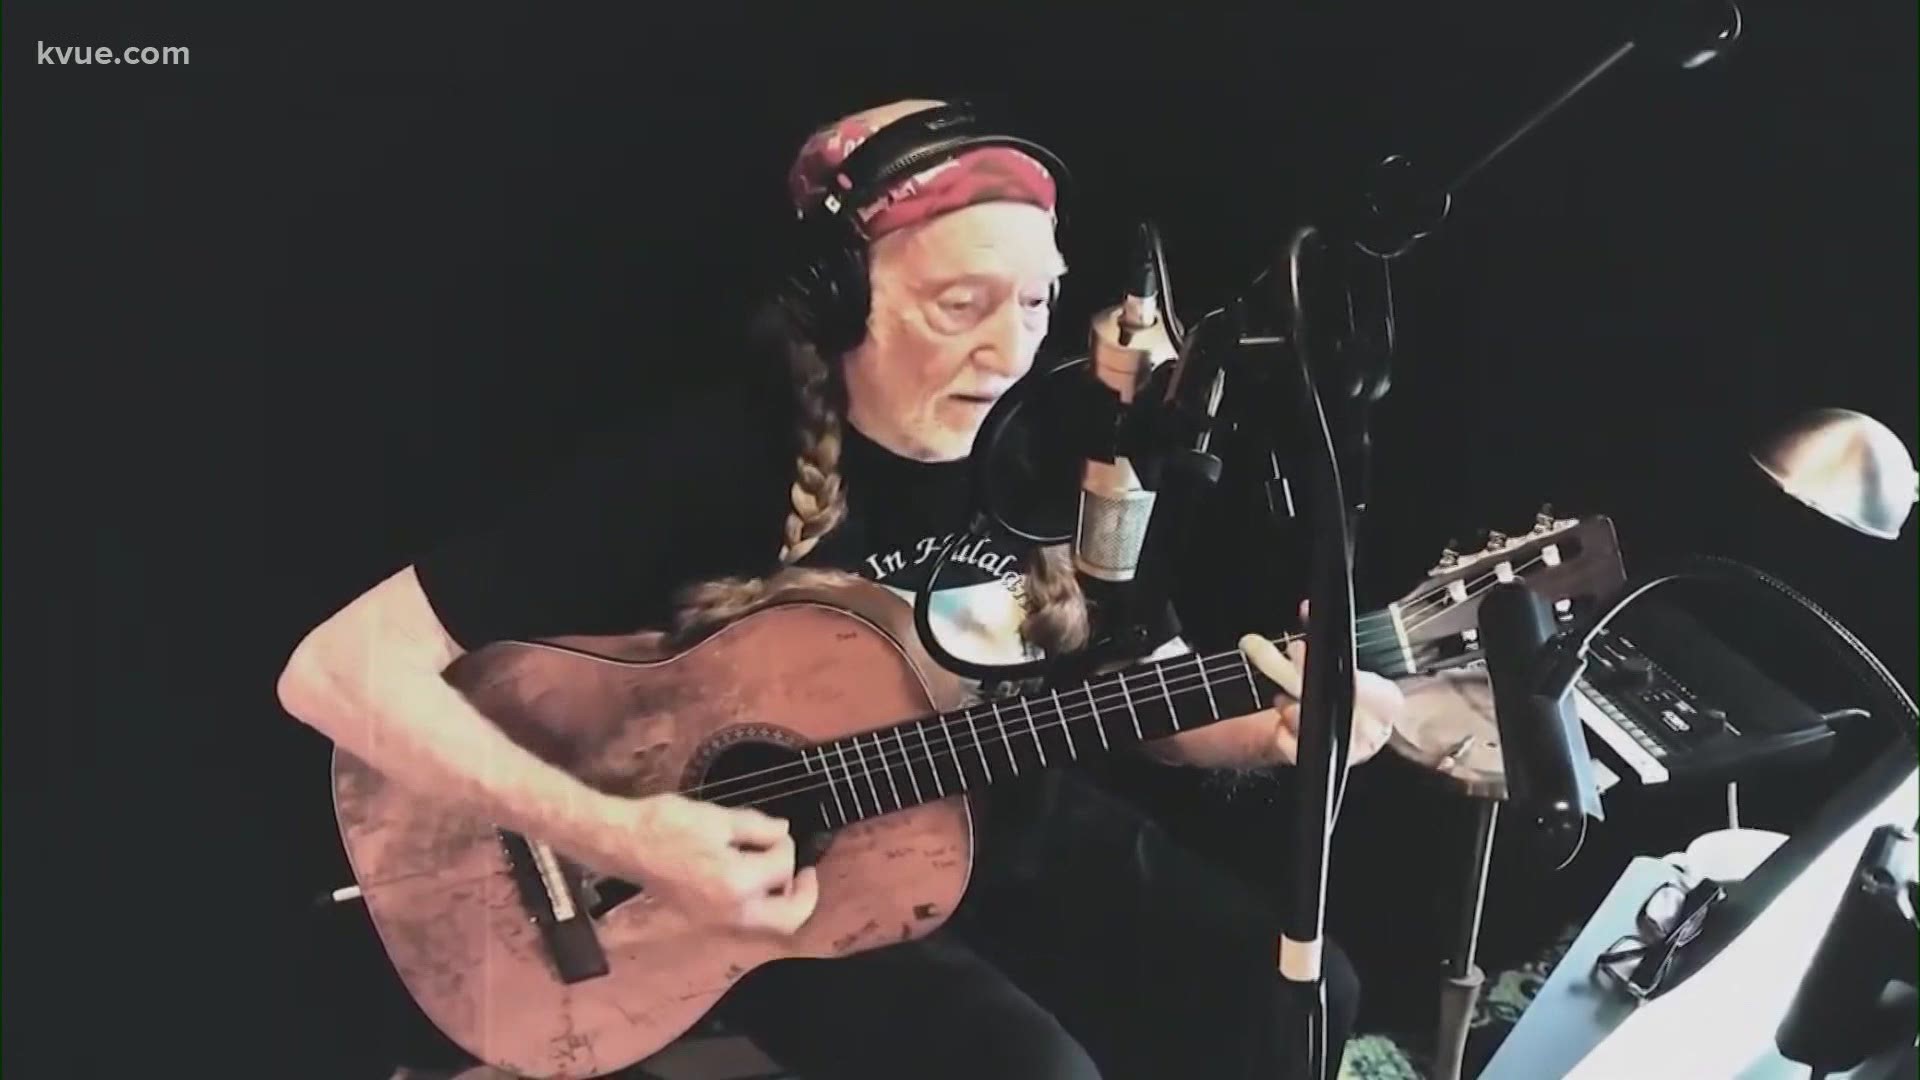 As a part of the virtual benefit raising money for Texas winter storm victims, Willie Nelson sang "Beautiful Texas."